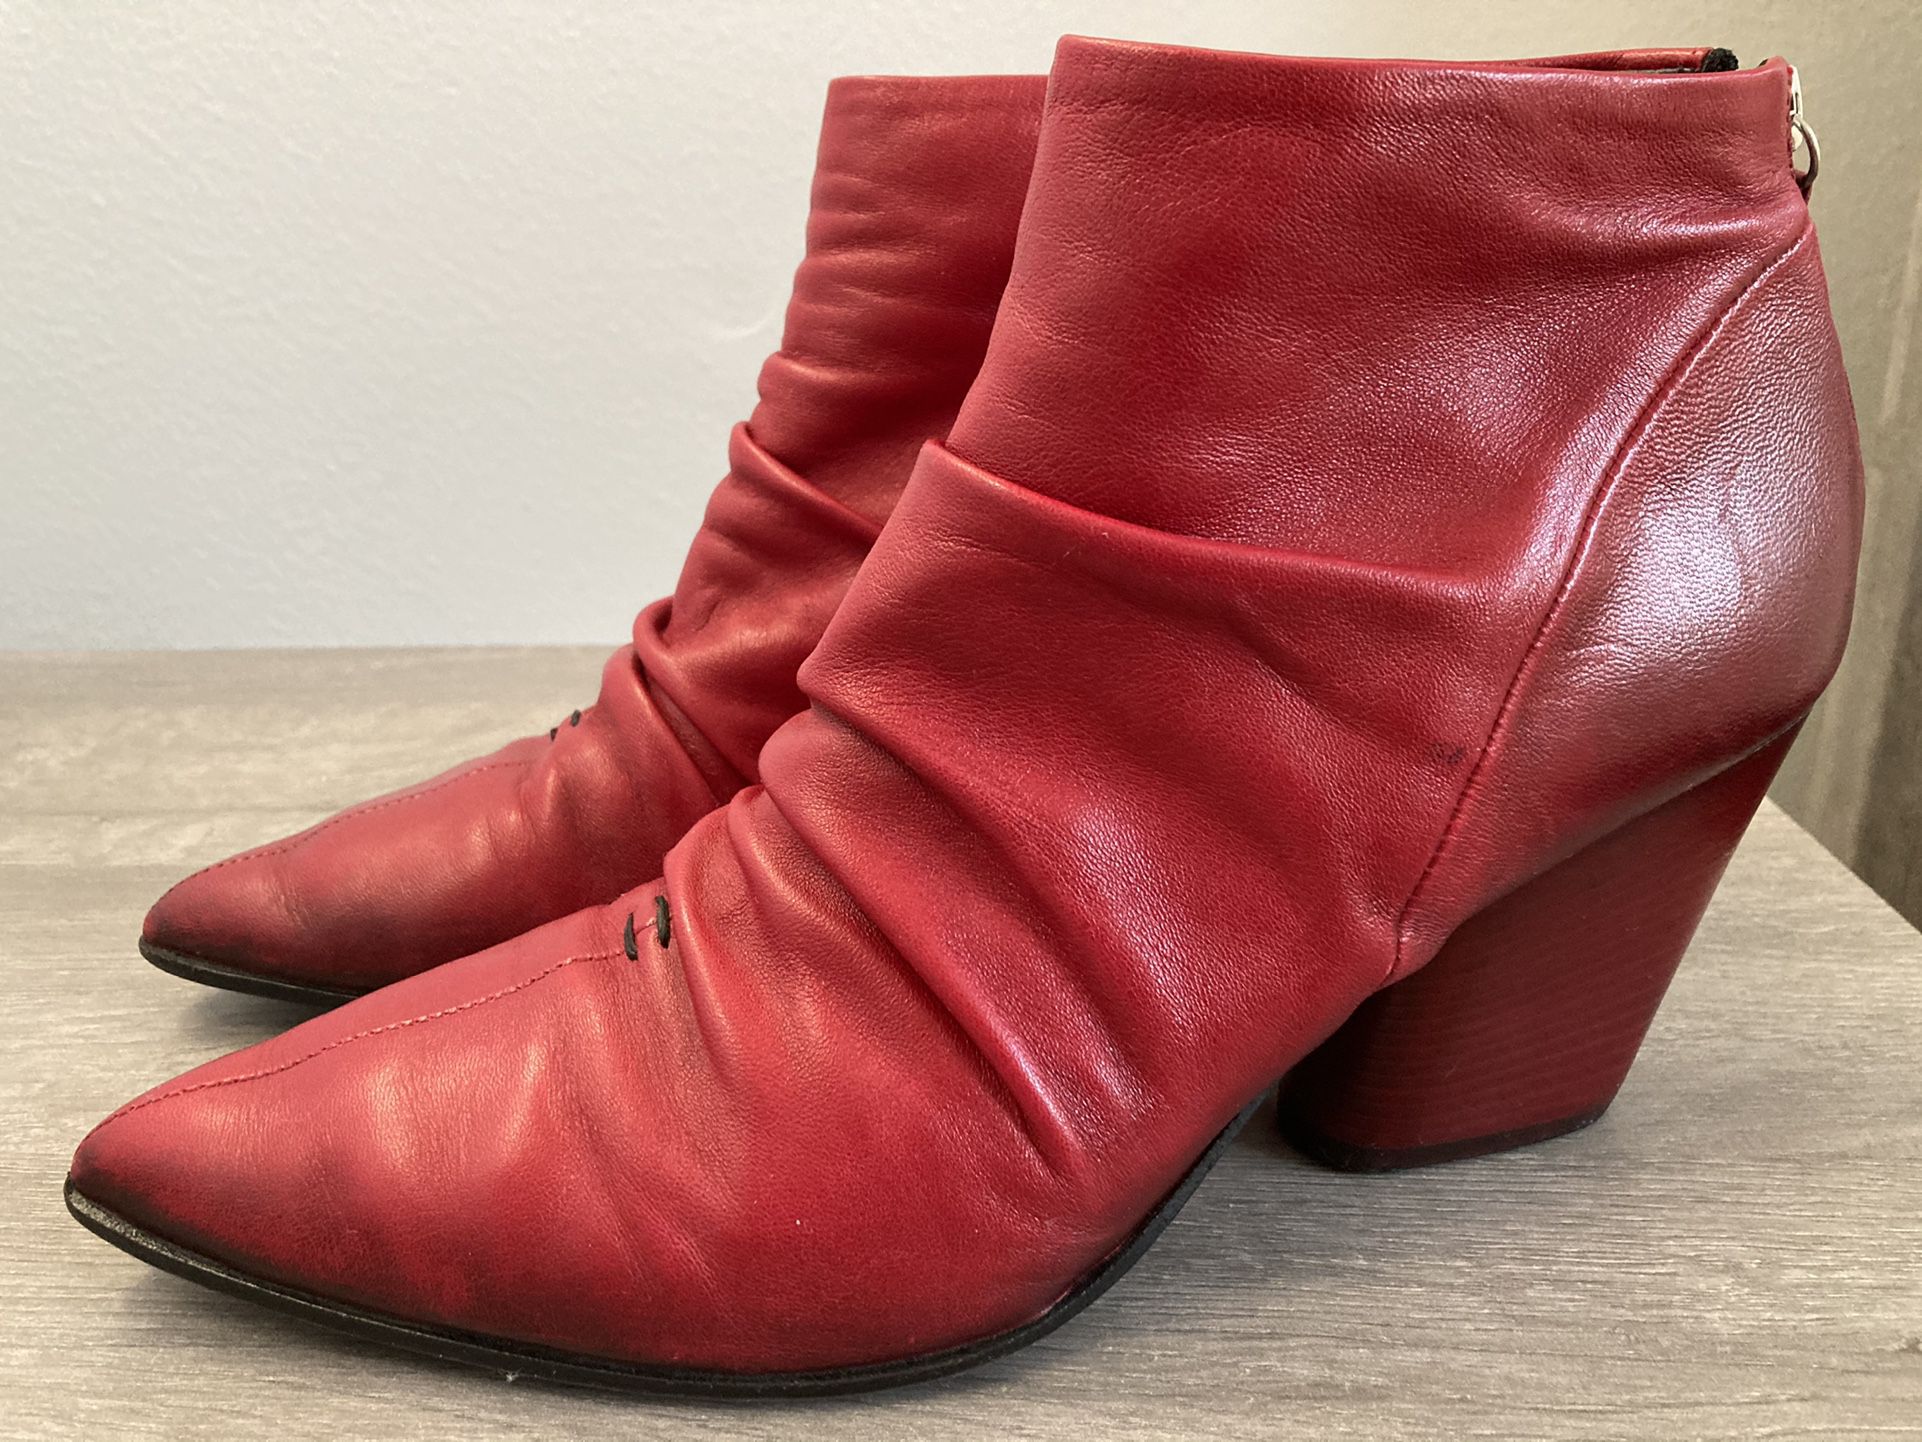 Halmanera SZ 8/39 Red Leather ankle boots, retails for $350